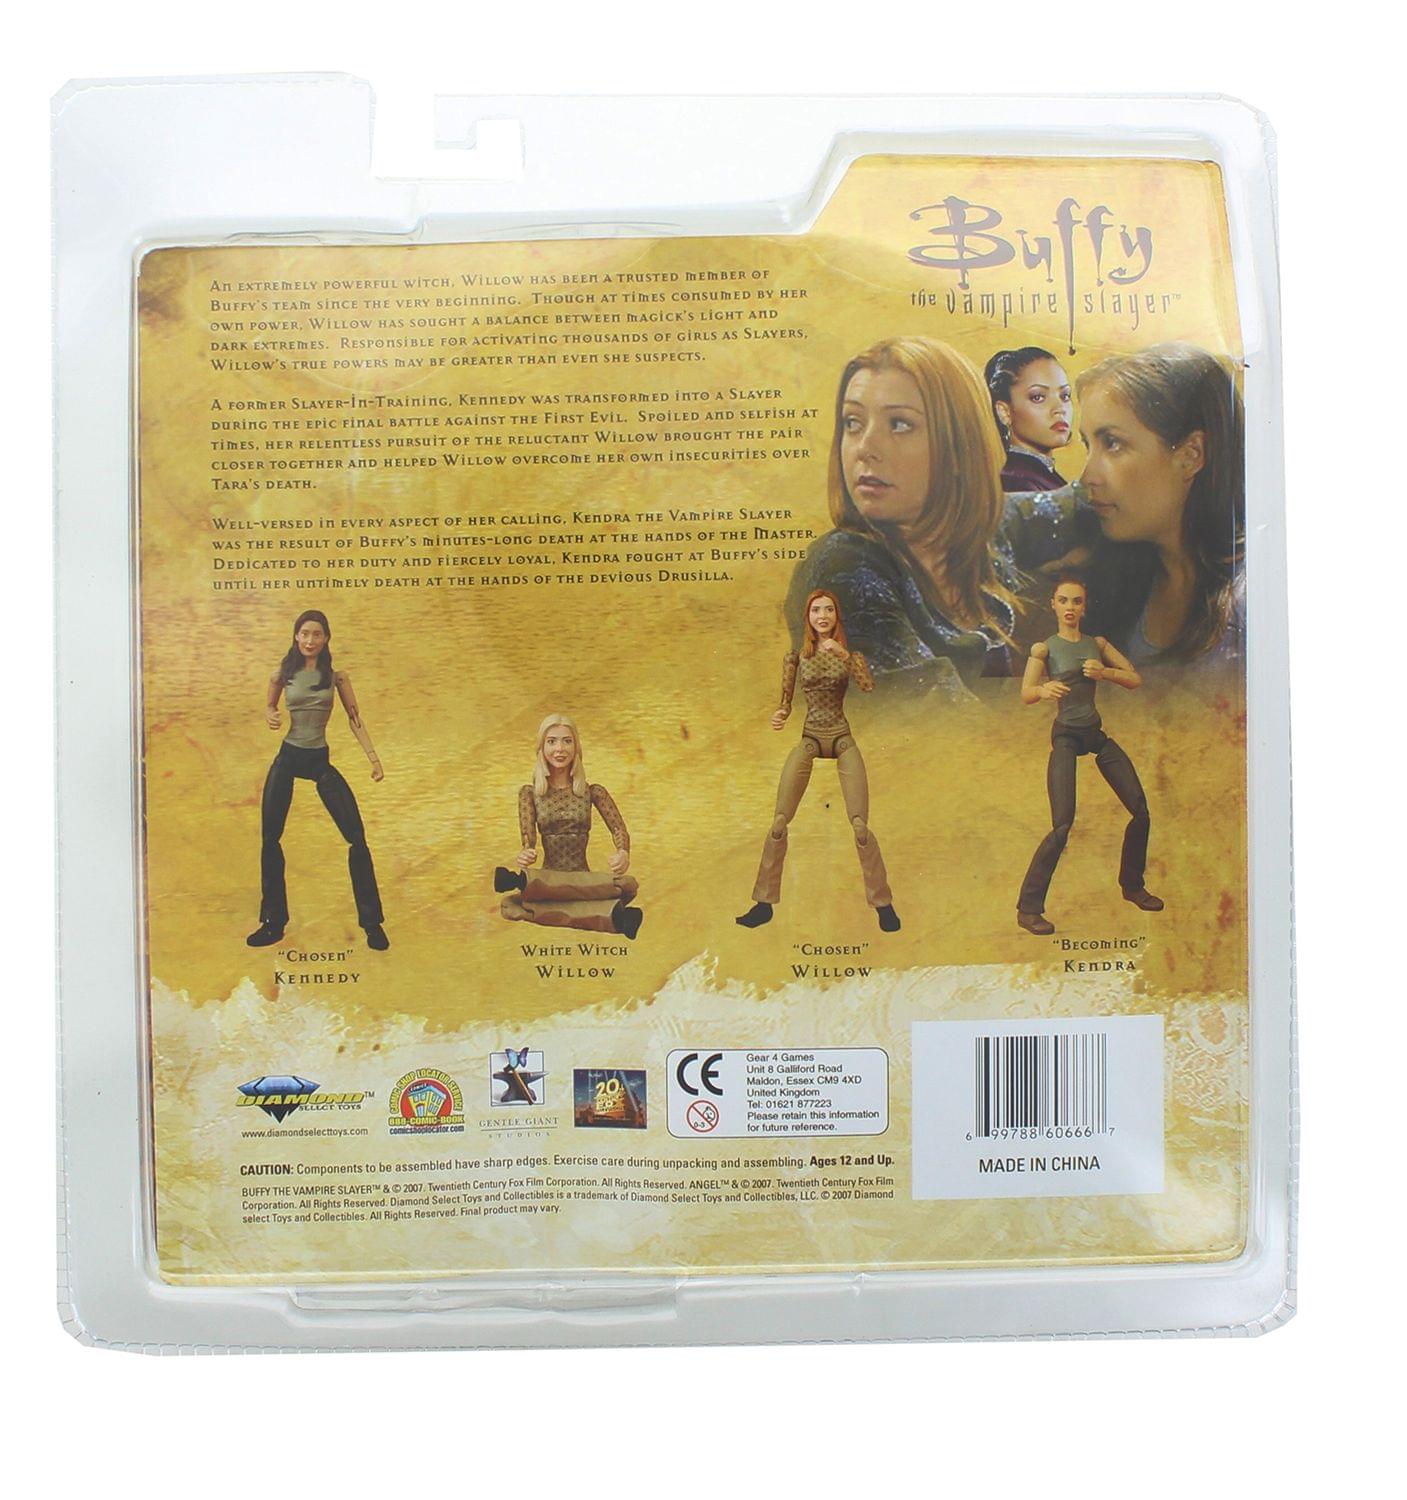 Buffy The Vampire Slayer Exclusive 6 Inch Action Figure - Becoming Kendra